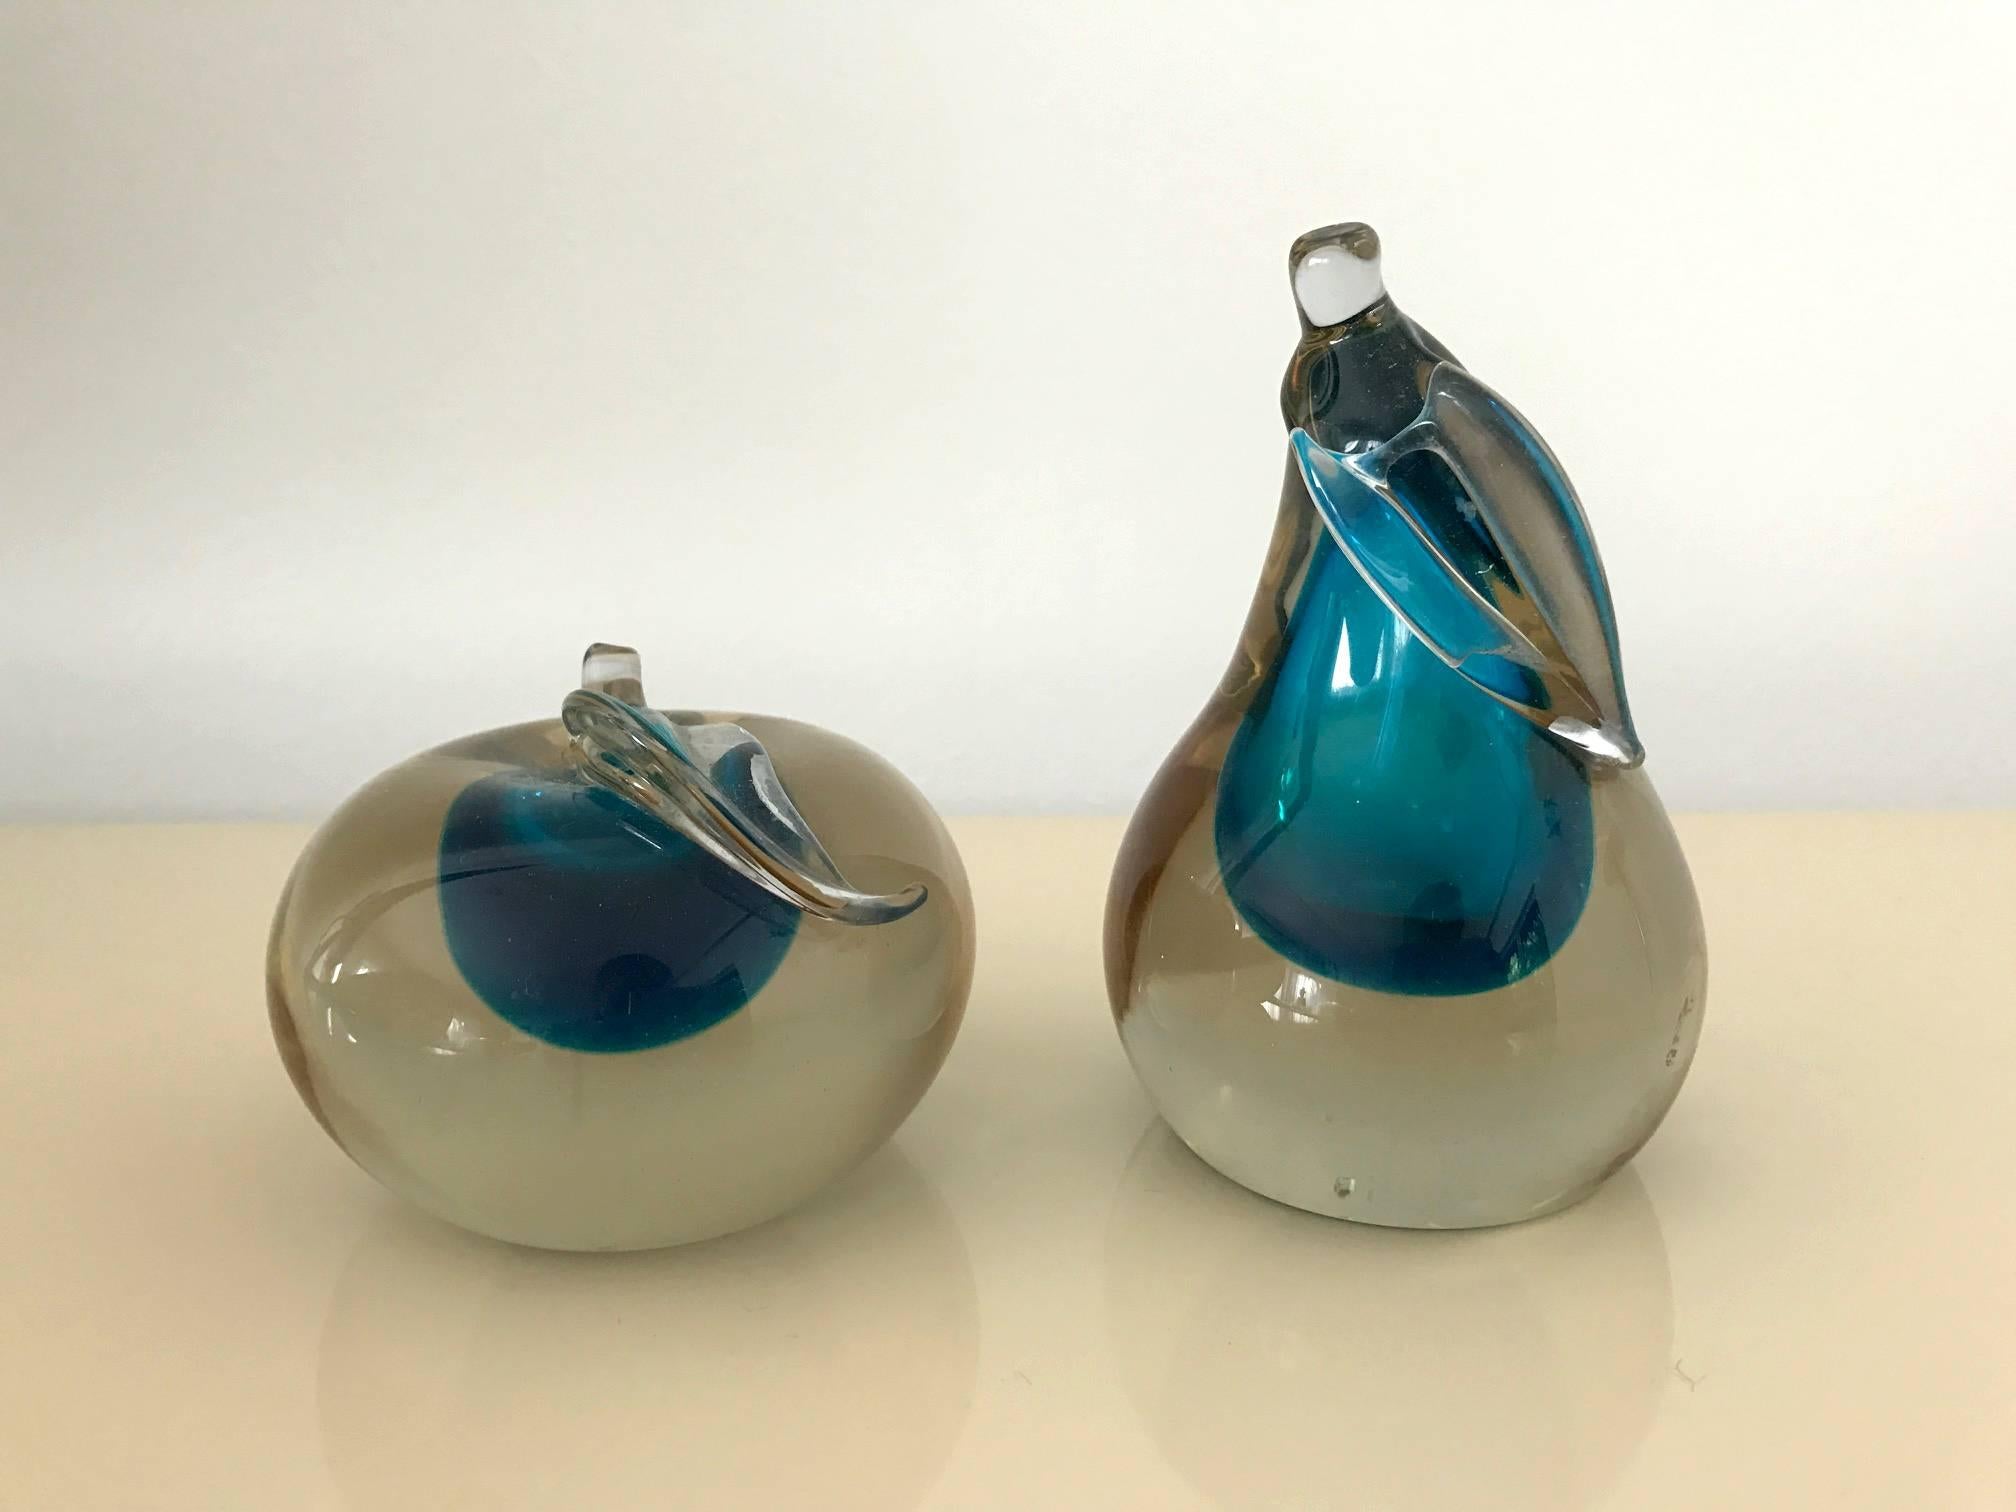 A lovely pair of solid art glass bookend depicting an apple and a pear with leaves. With flat and polished facet on one side for keeping books or placing together. These also make great paperweight as desk accessories. Made in Murano and the design